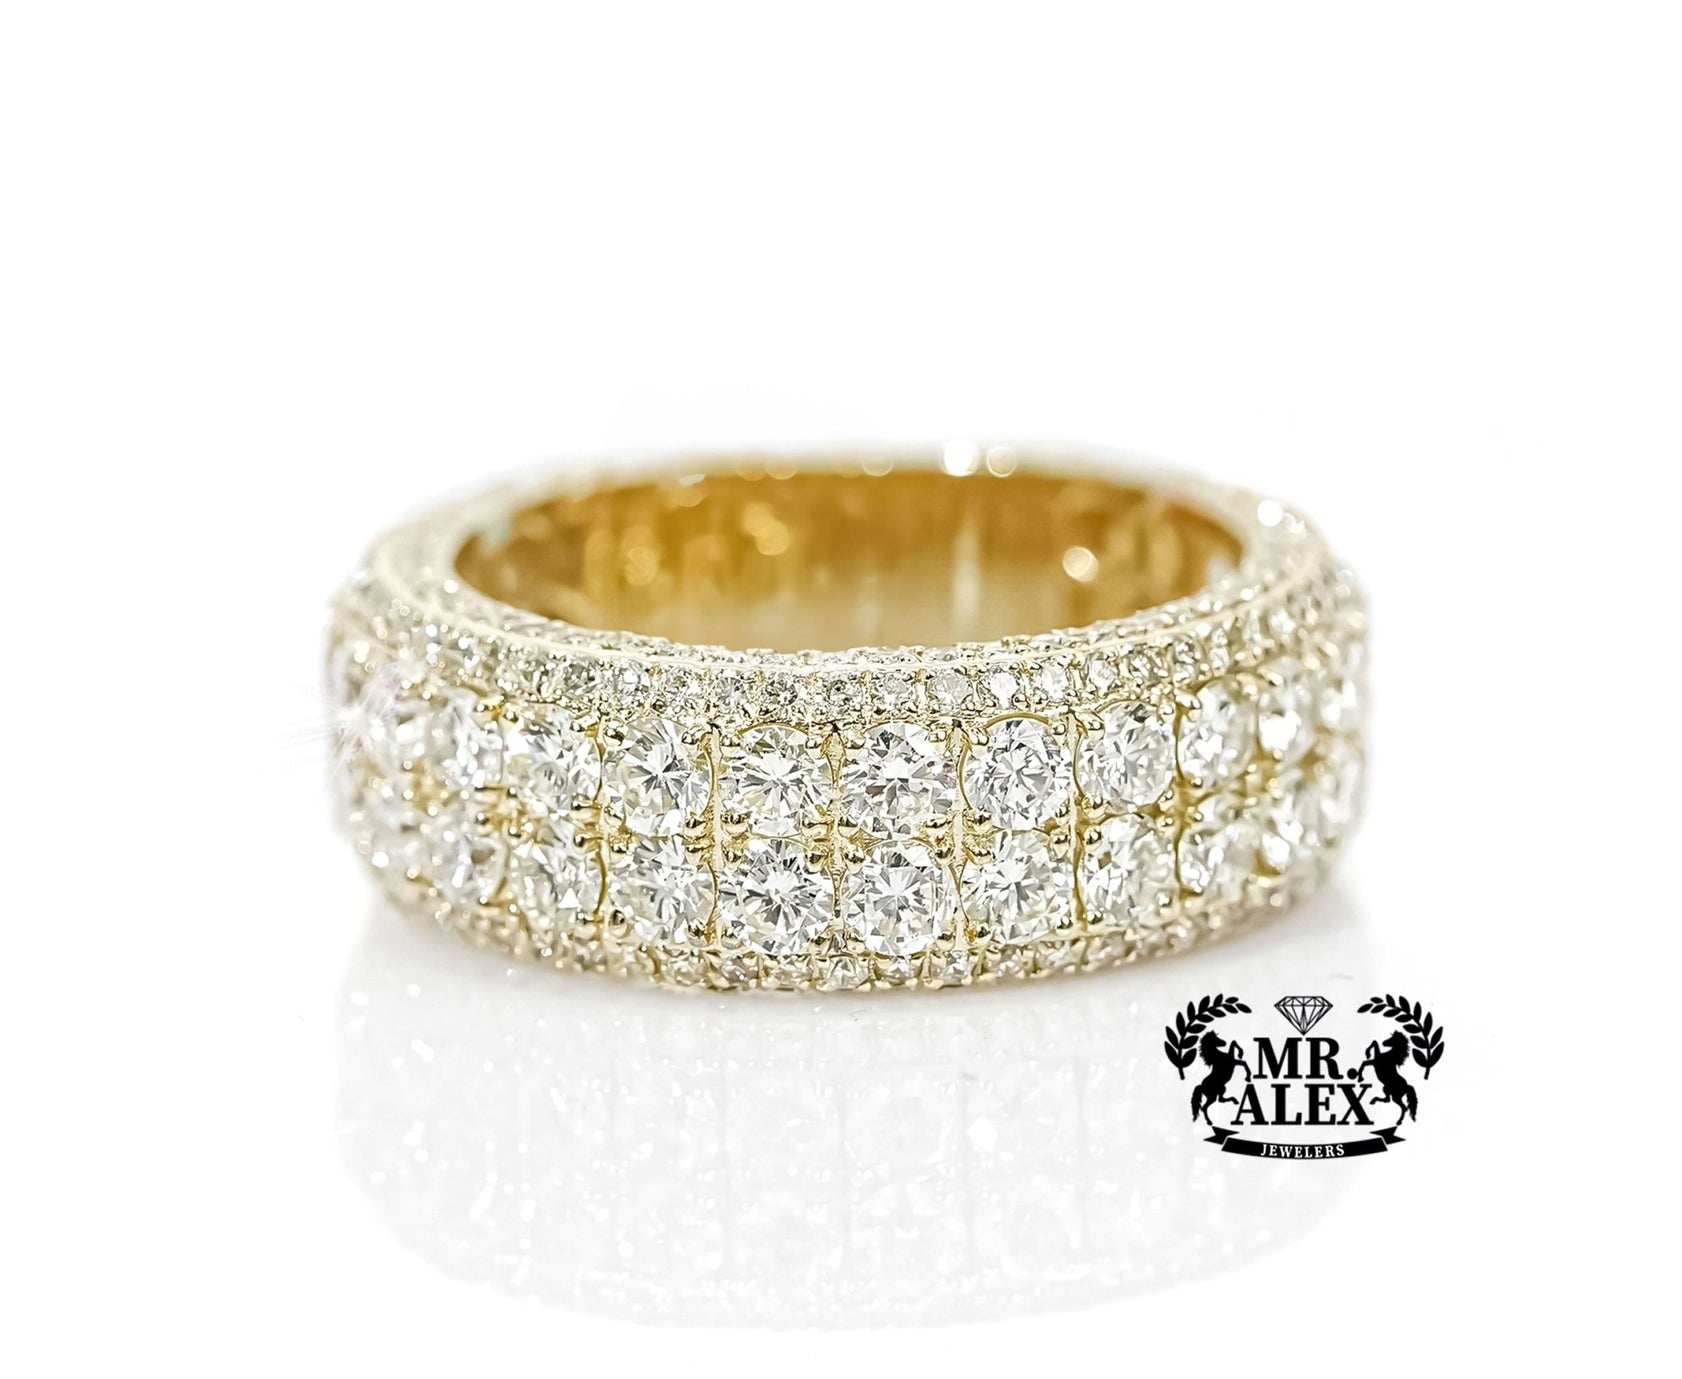 10k Gold Luxe Diamond Encrusted Band 4.95ct - Mr. Alex Jewelry